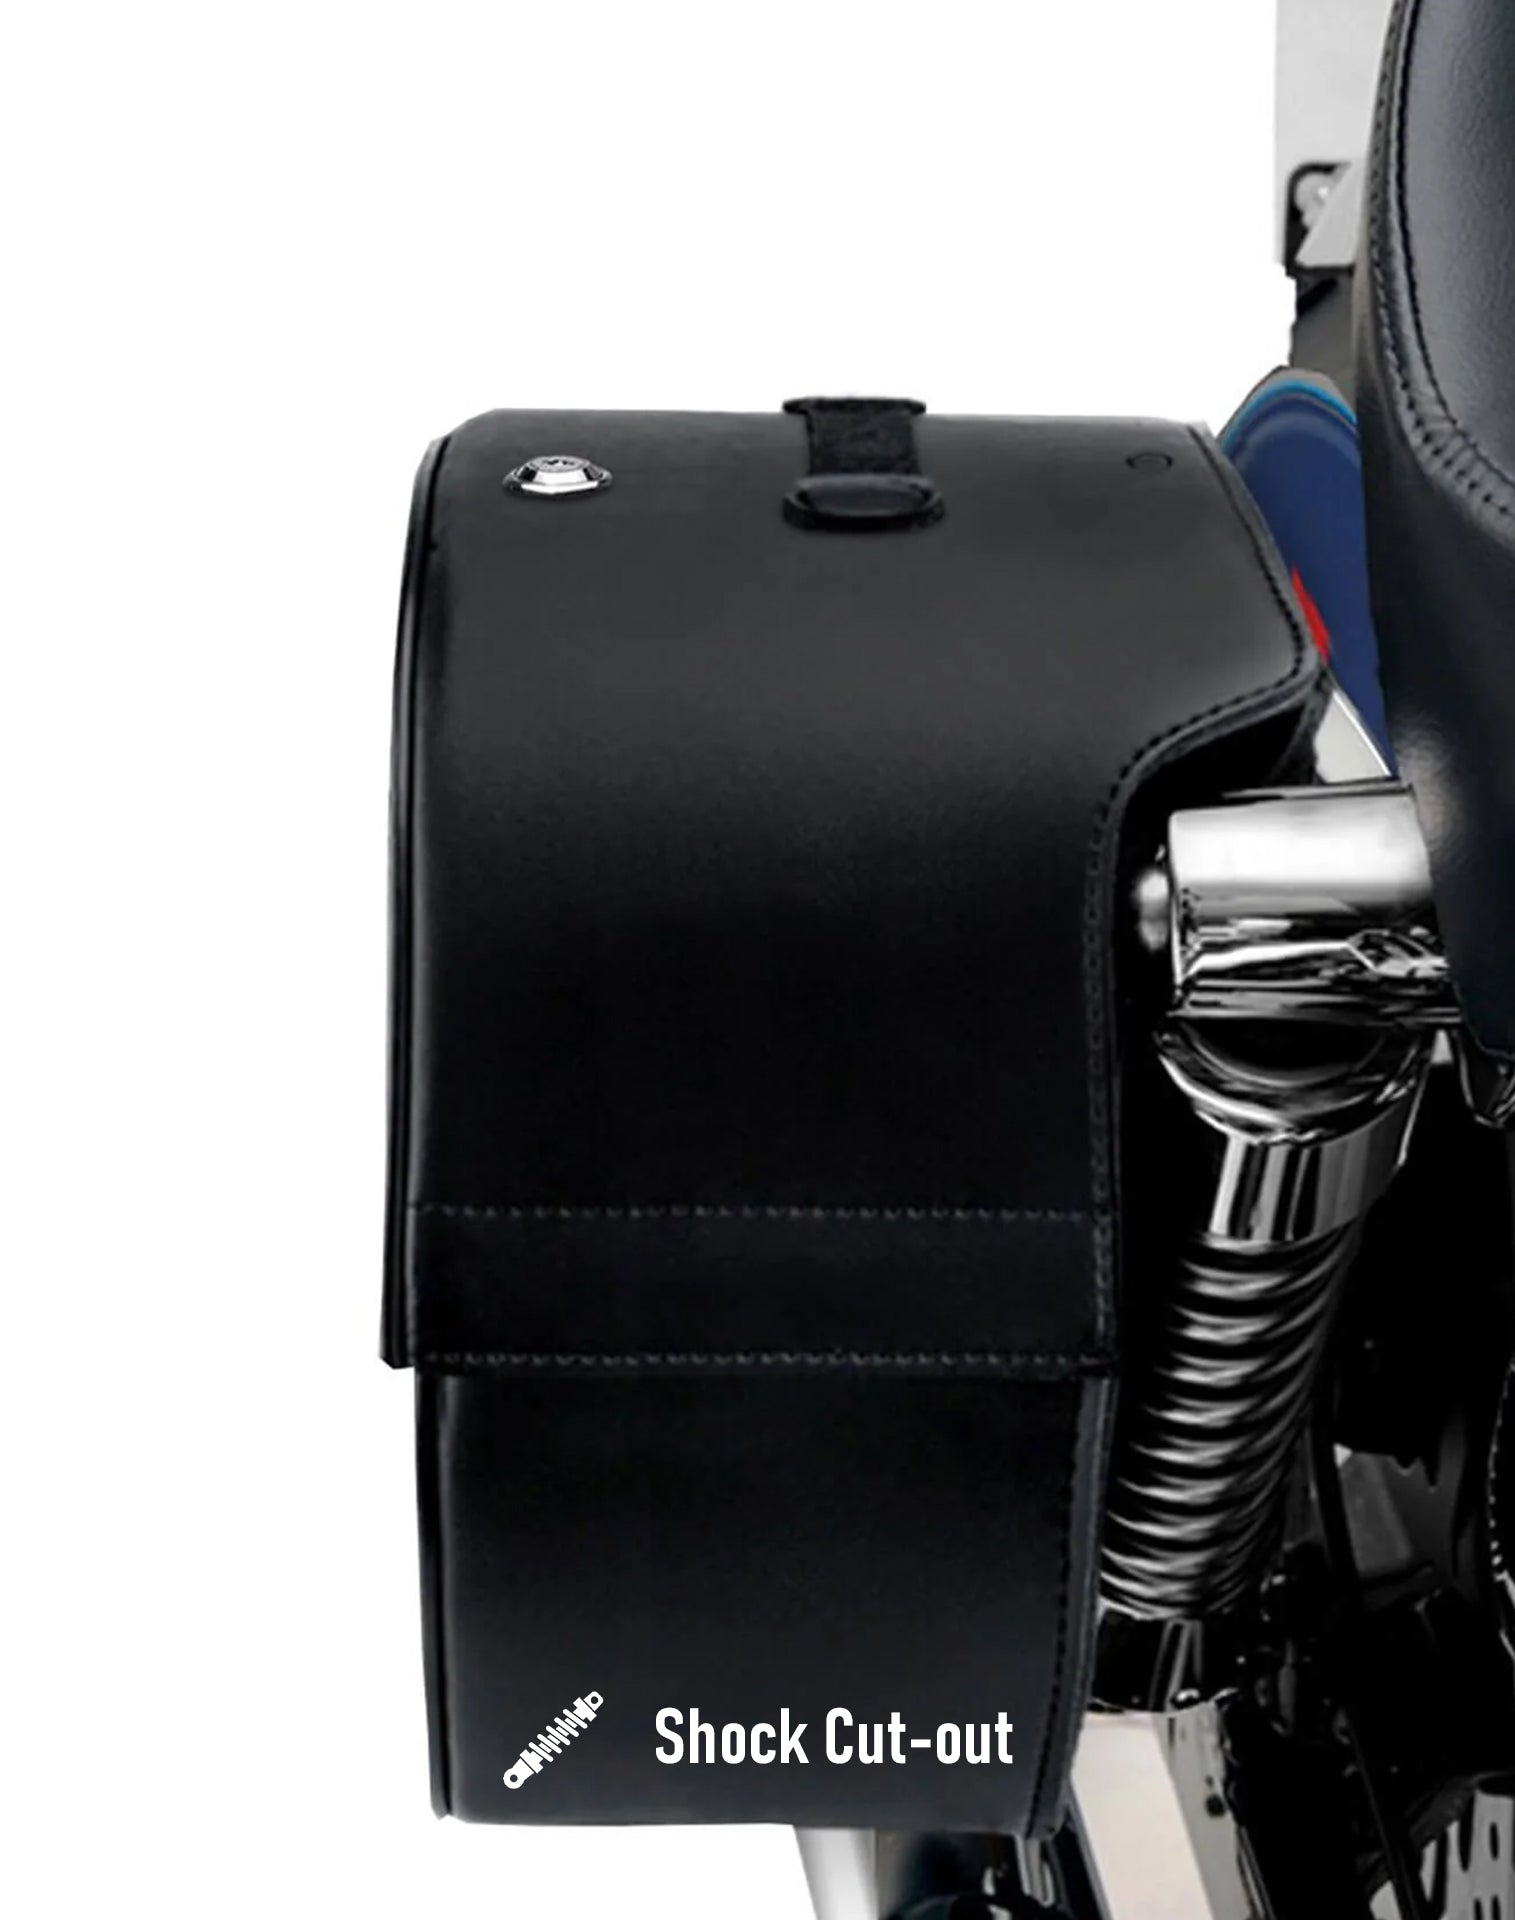 Viking Club Large Honda Rebel 250 Cmx250C Shock Cut Out Leather Motorcycle Saddlebags are Durable